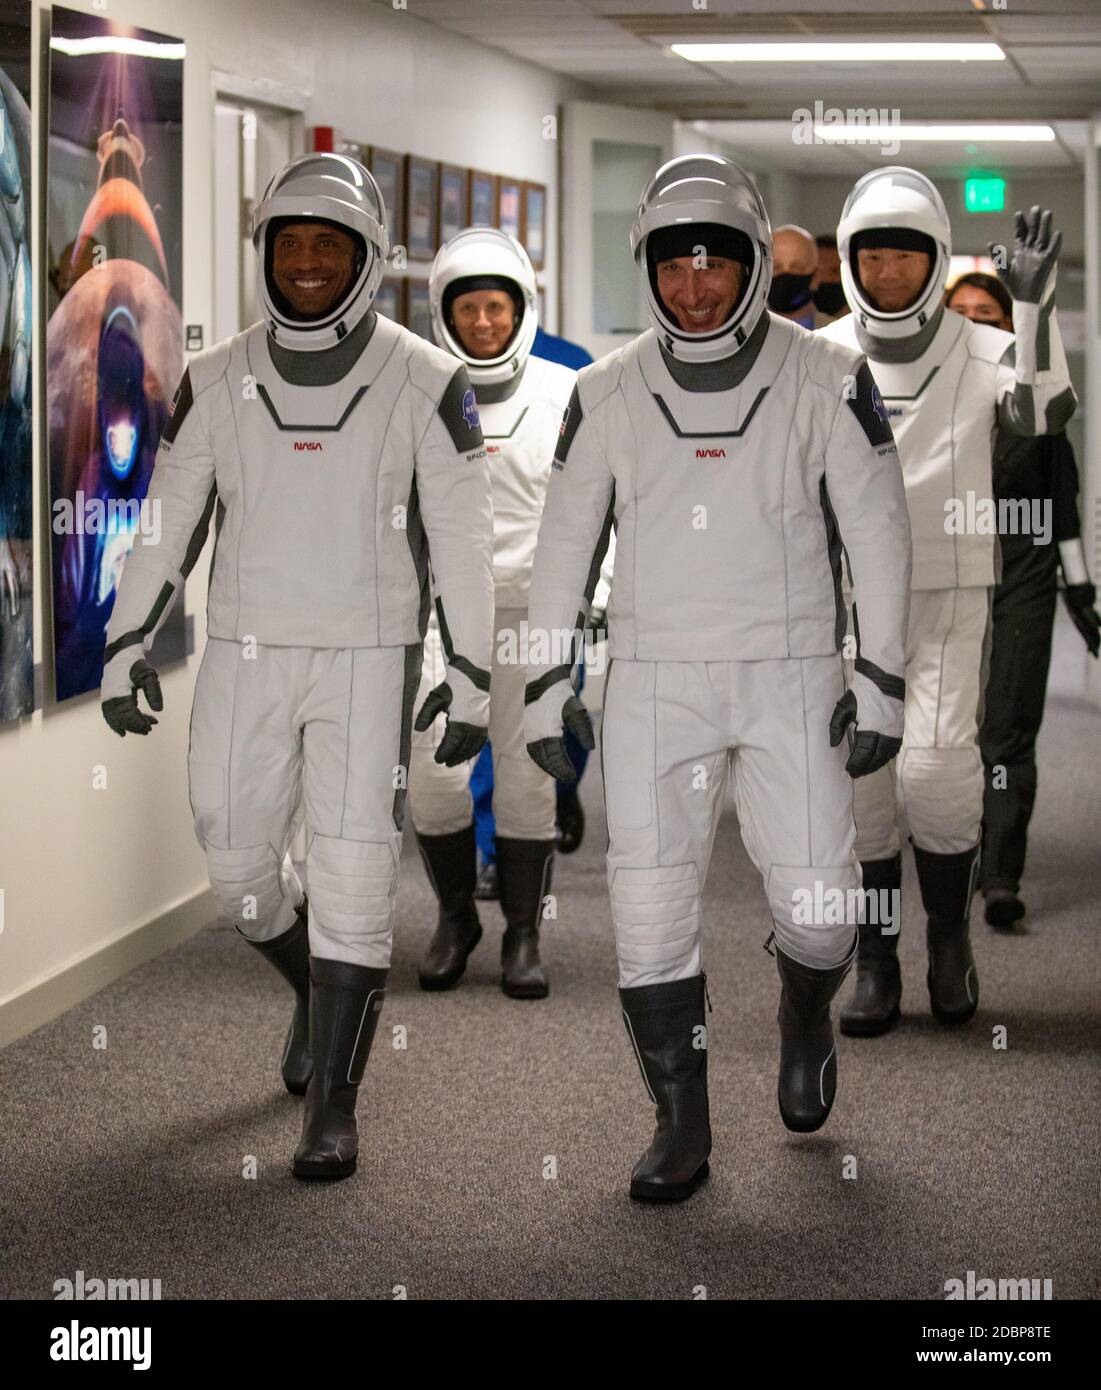 The NASA SpaceX Commercial Crew One astronauts walk down the hallway of the Neil  Armstrong Operations and Checkout Building at the Kennedy Space Center November 15, 2020 in Cape Canaveral, Florida. Standing left to right are: Front row: NASA astronaut Victor Glover and Mike Hopkins; back row: NASA astronaut Shannon Walker and JAXA astronaut Soichi Noguchi all wearing SpaceX ACES launch suits. Stock Photo